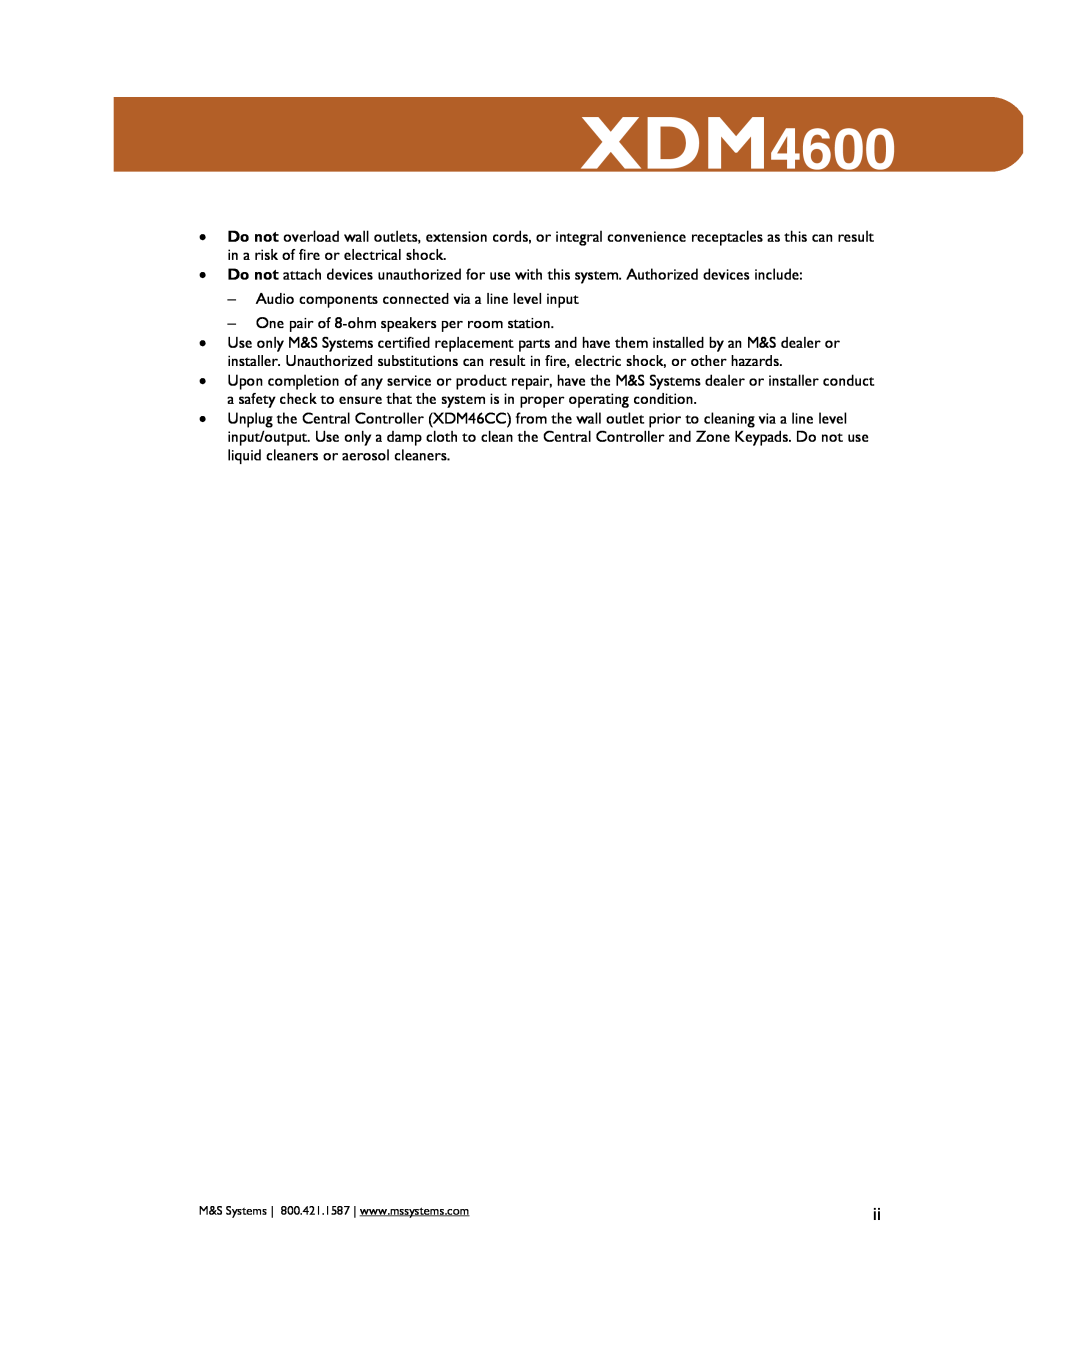 M&S Systems XDM4600 owner manual Audio components connected via a line level input 